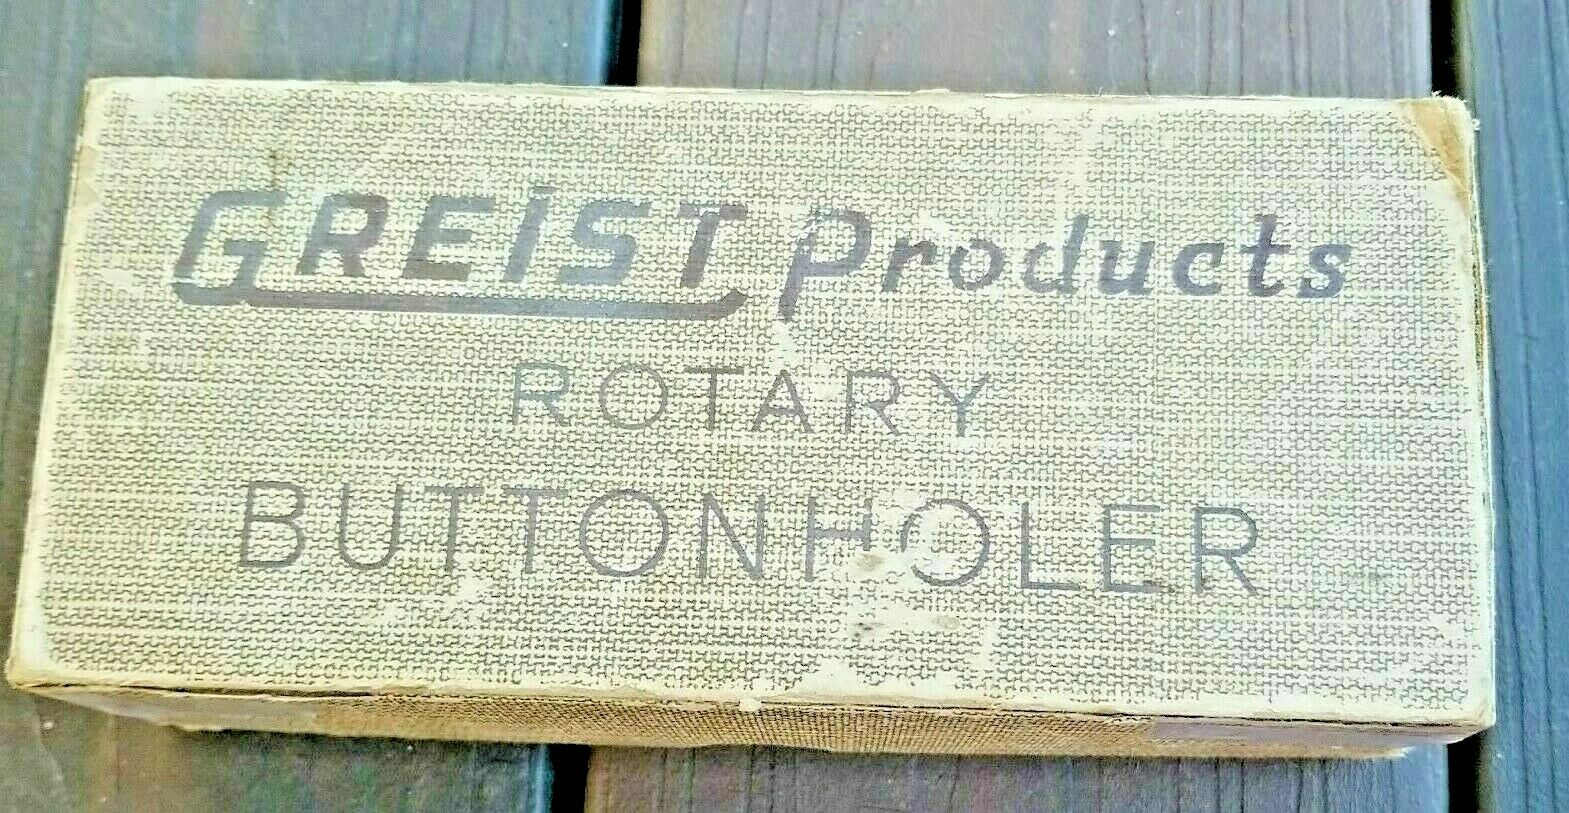 Vintage Greist Products Rotary Button Holer in Original Box with Instructions - $14.99